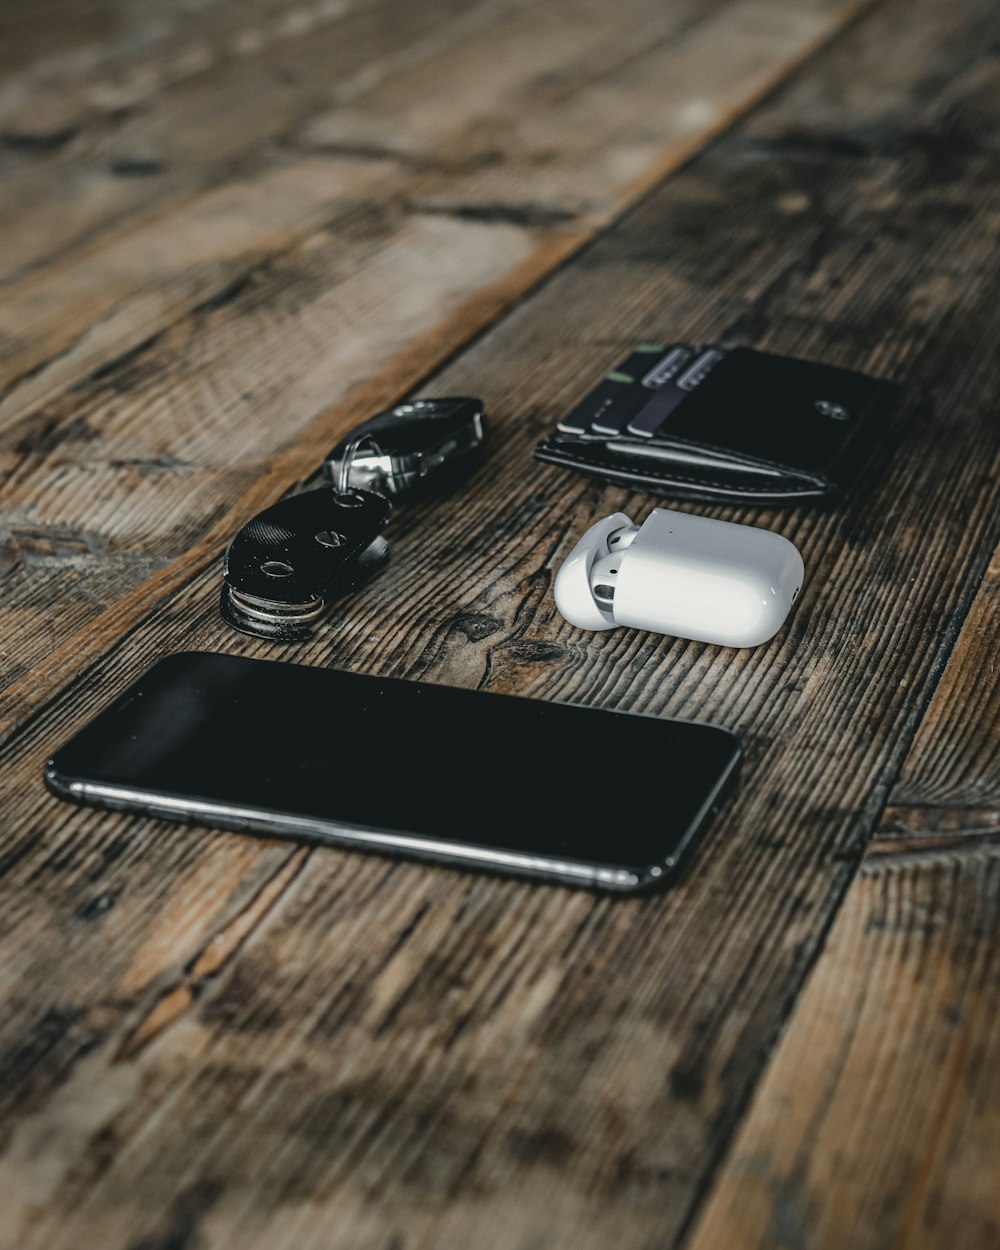 black and silver dslr camera beside black samsung android smartphone on brown wooden table